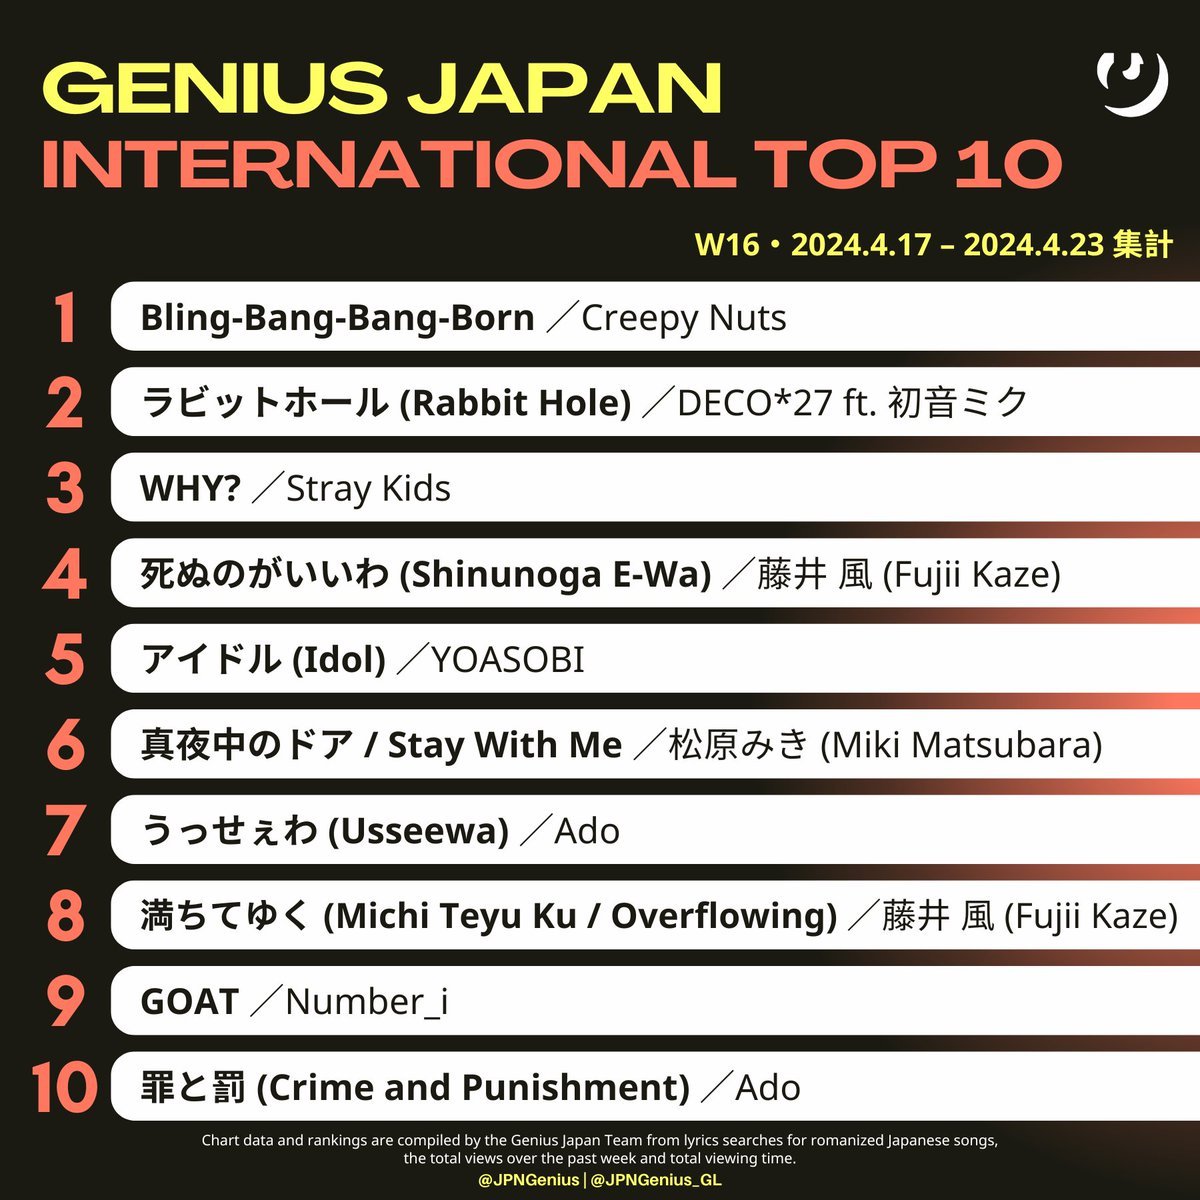 #GeniusCharts | Number_i @number_i_staff   '#GOAT' re-enters this week's Genius Japan INTERNATIONAL TOP 10 at #9 following their #Coachella performance